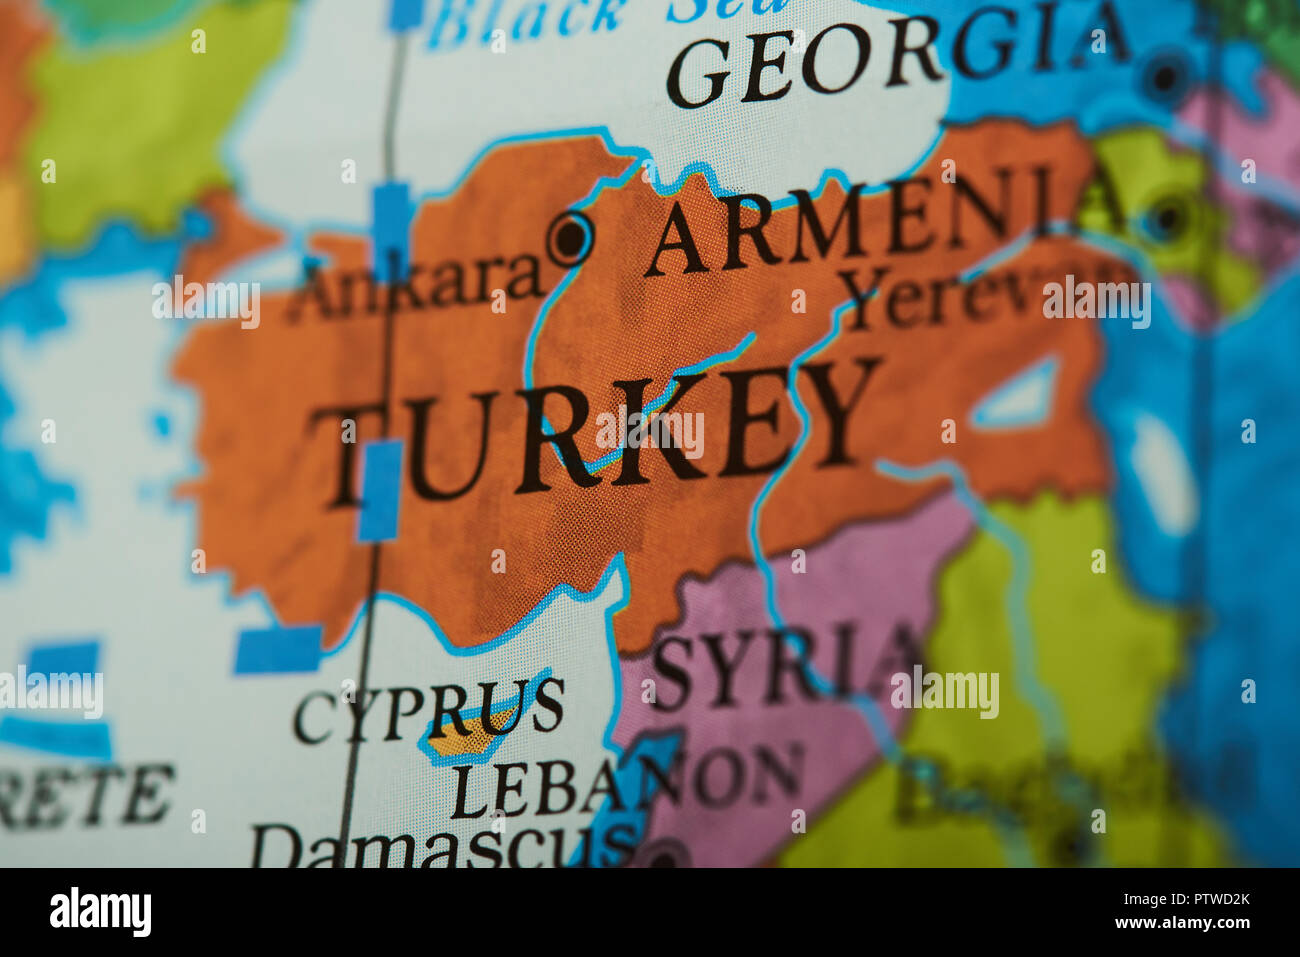 Turkey country on paper map close up view Stock Photo